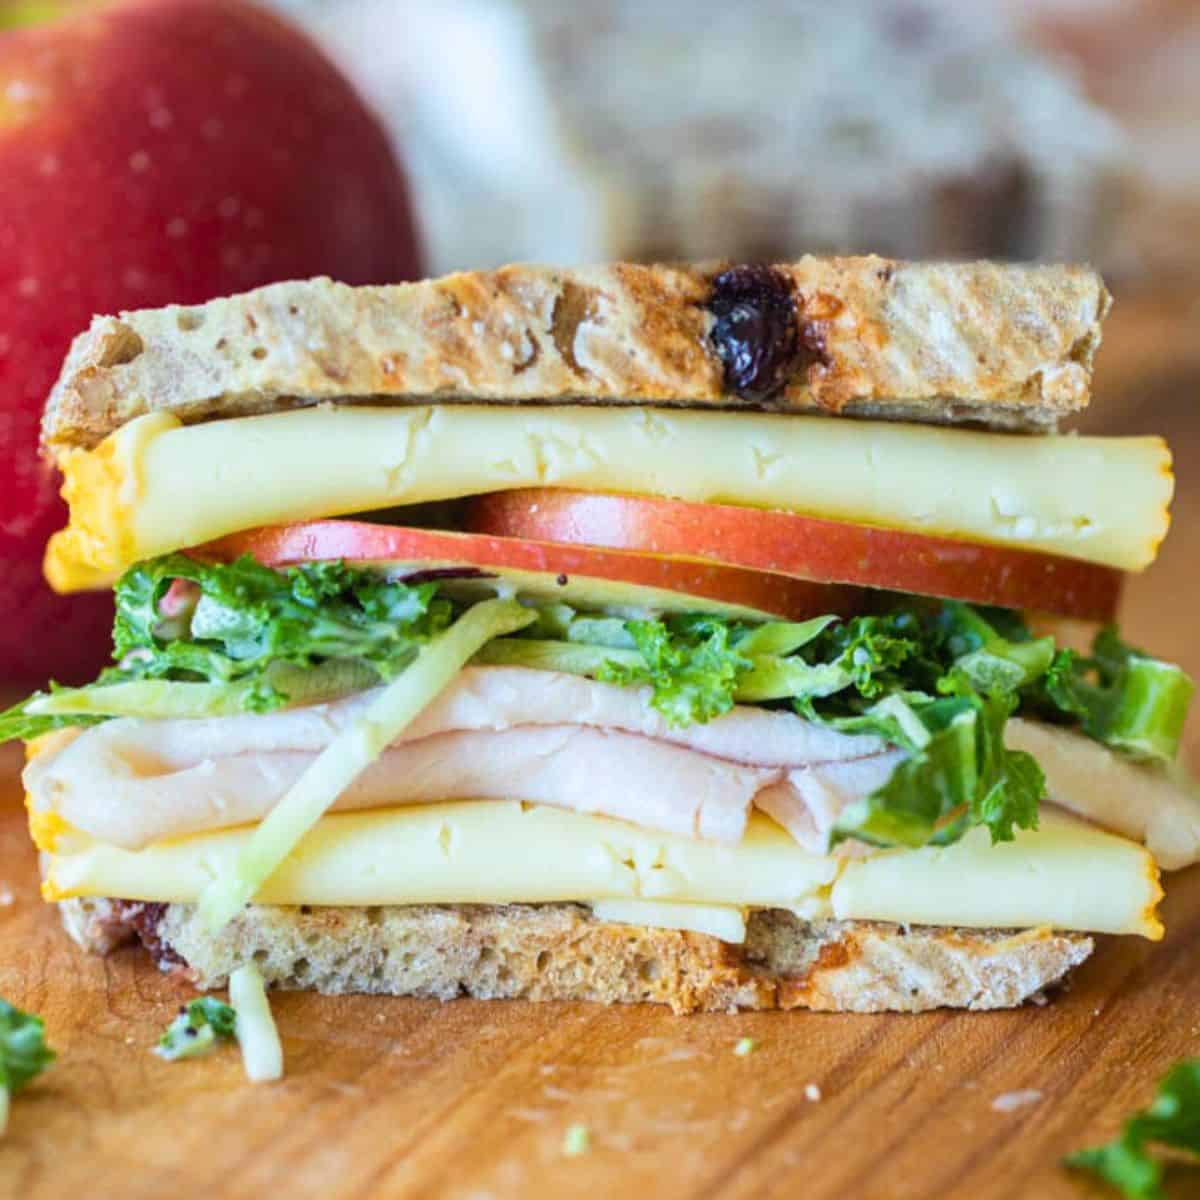 Turkey apple sandwich with white cheddar and kale salad on cutting board